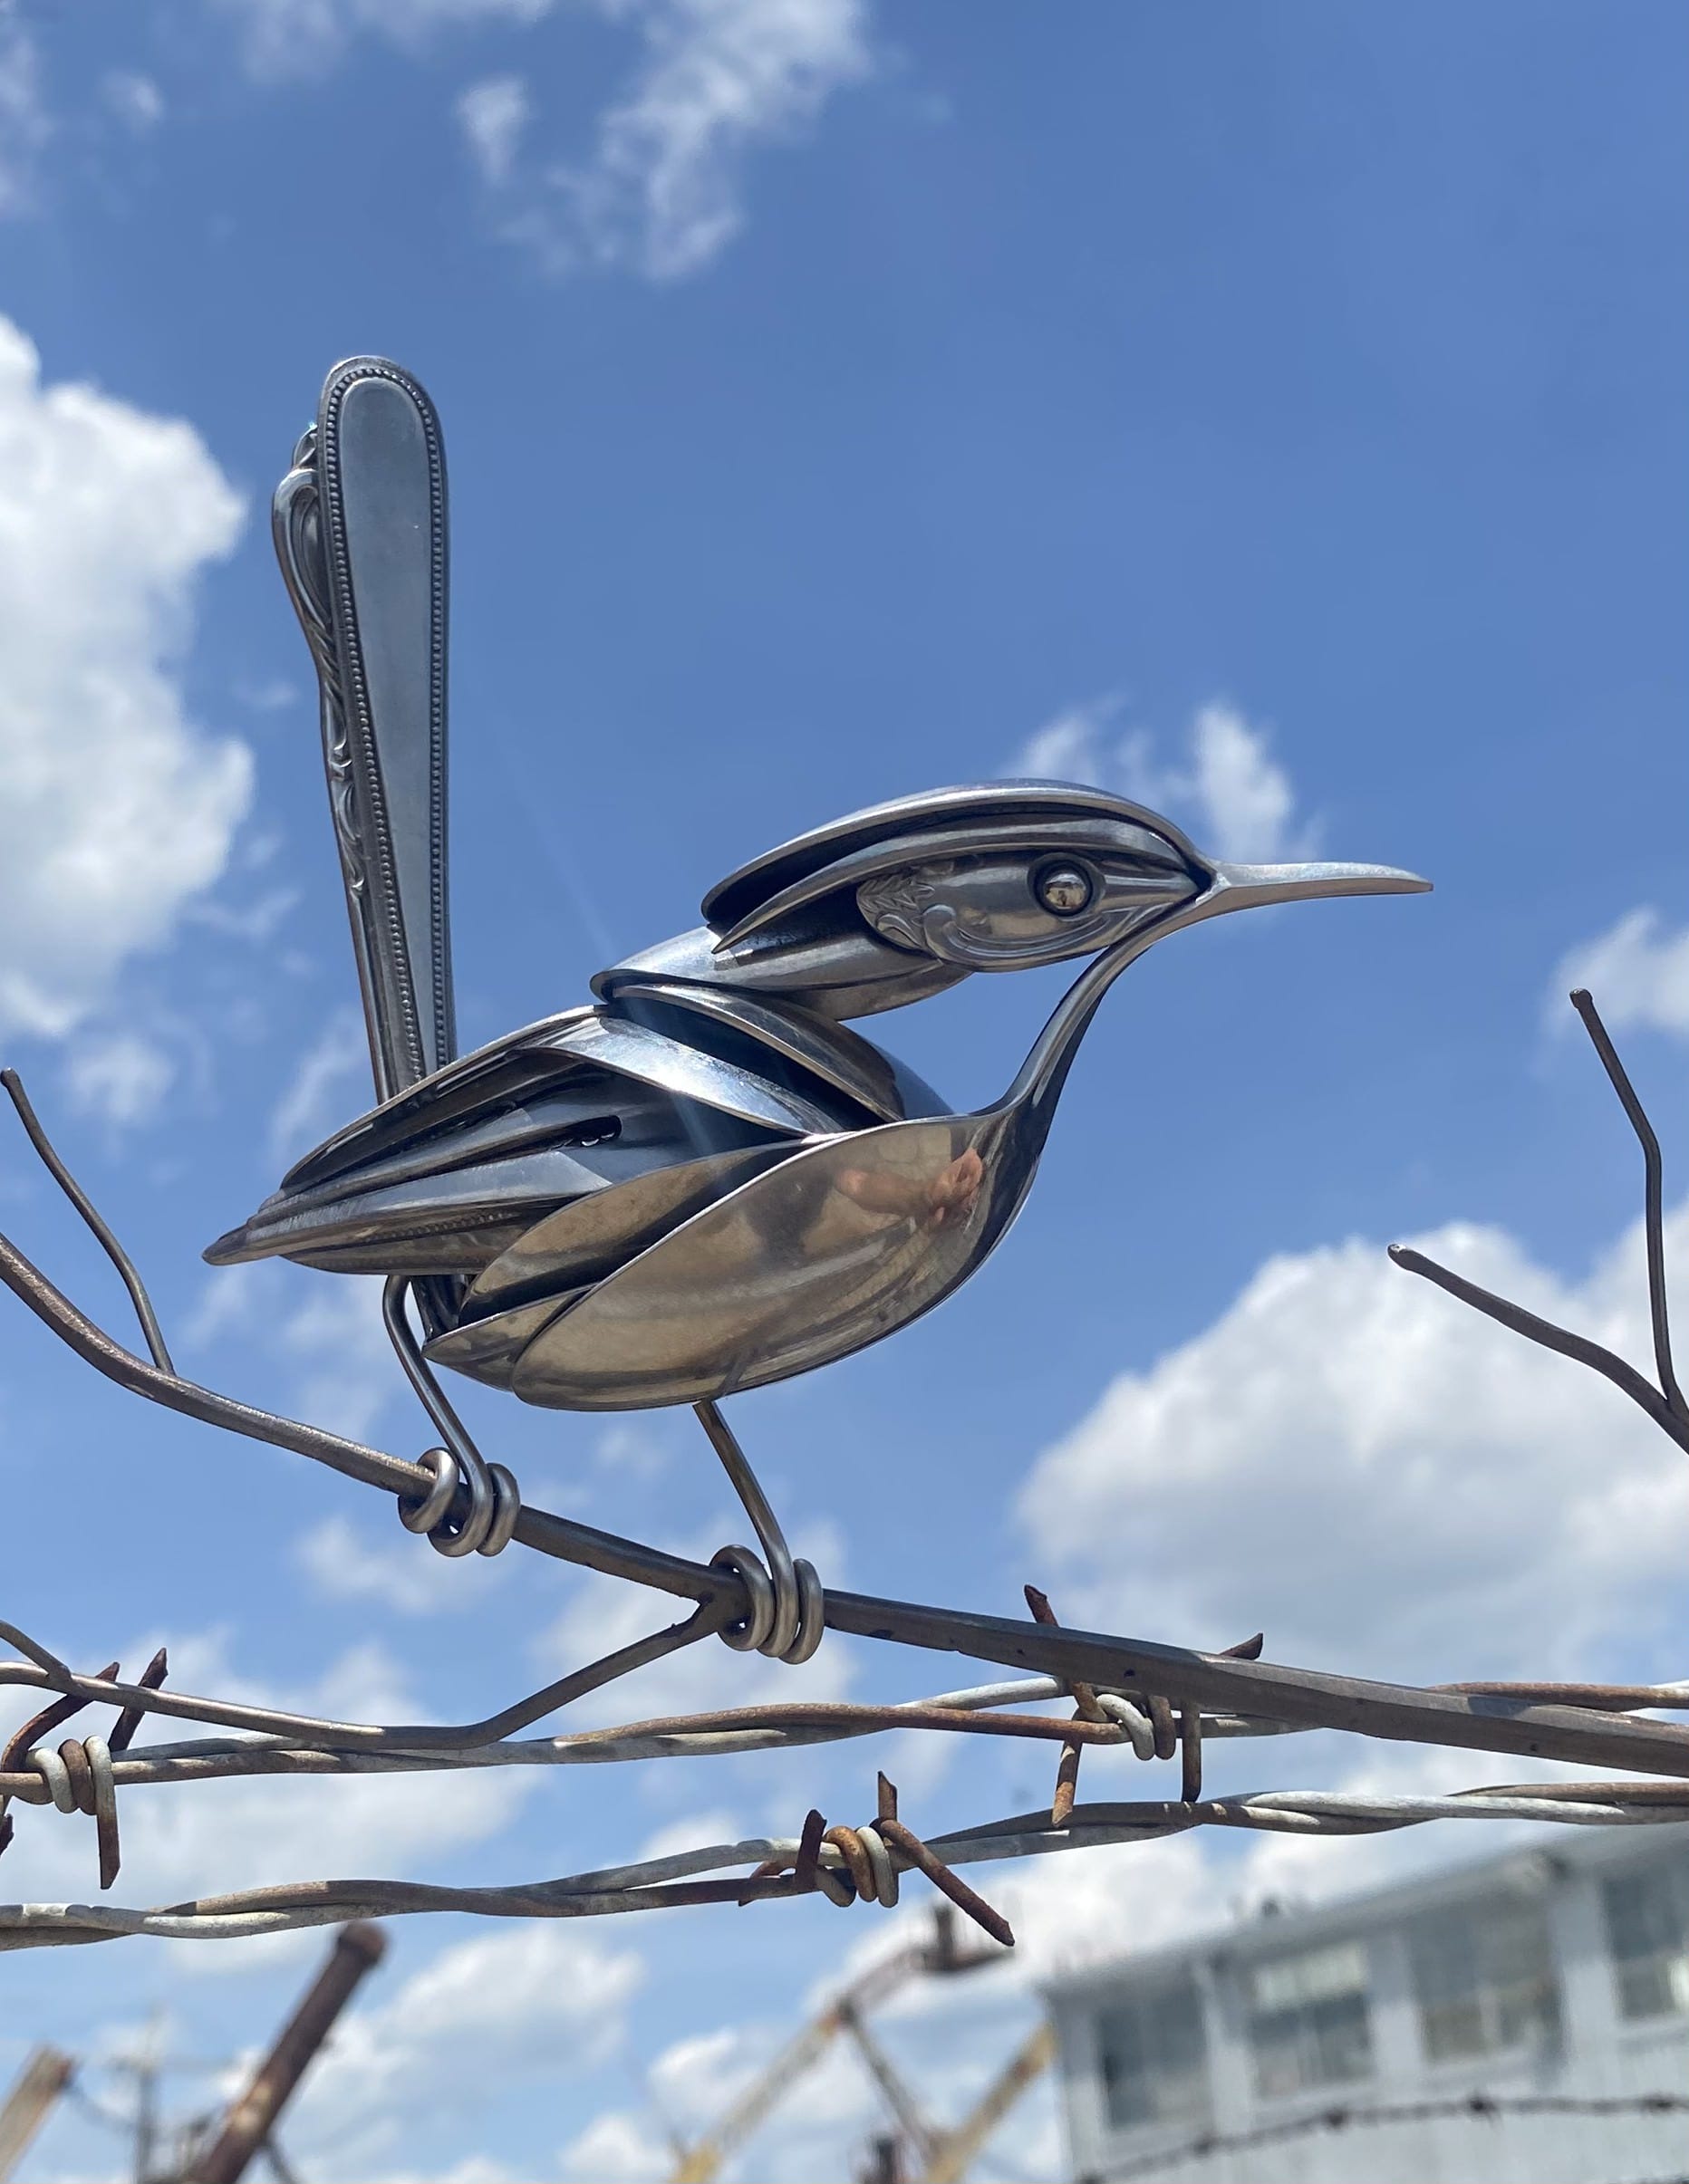 a metal bird made from repurposed silverware perches upon a metal branch resembling barbed wire